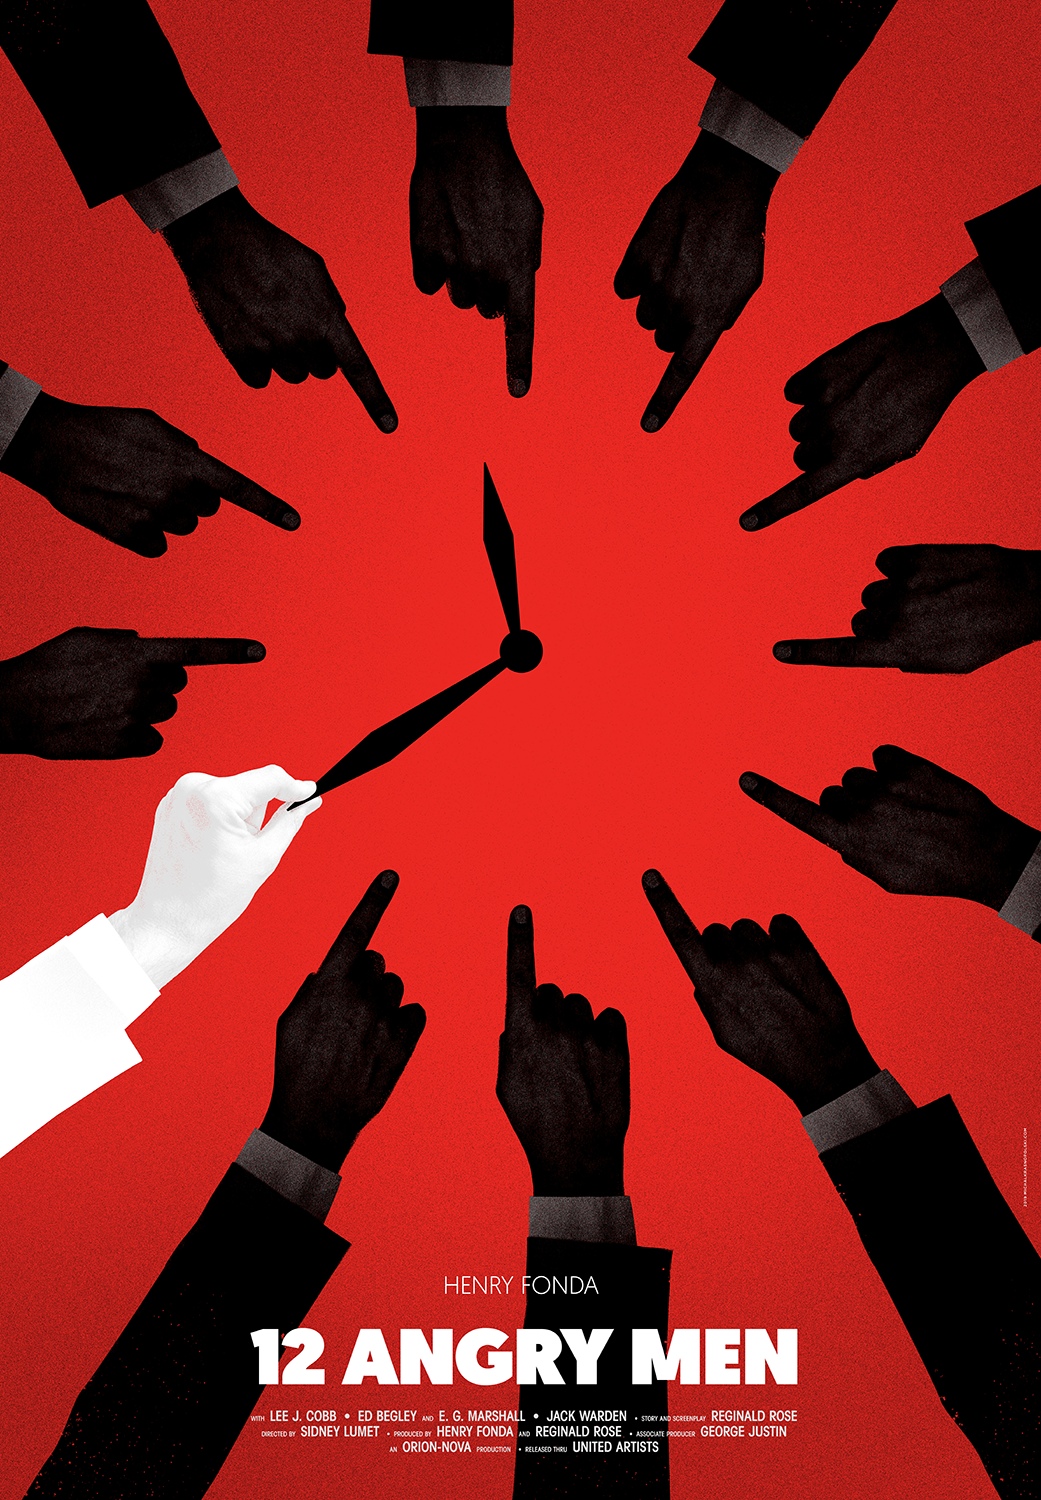 12 Angry Men' Poster on Behance